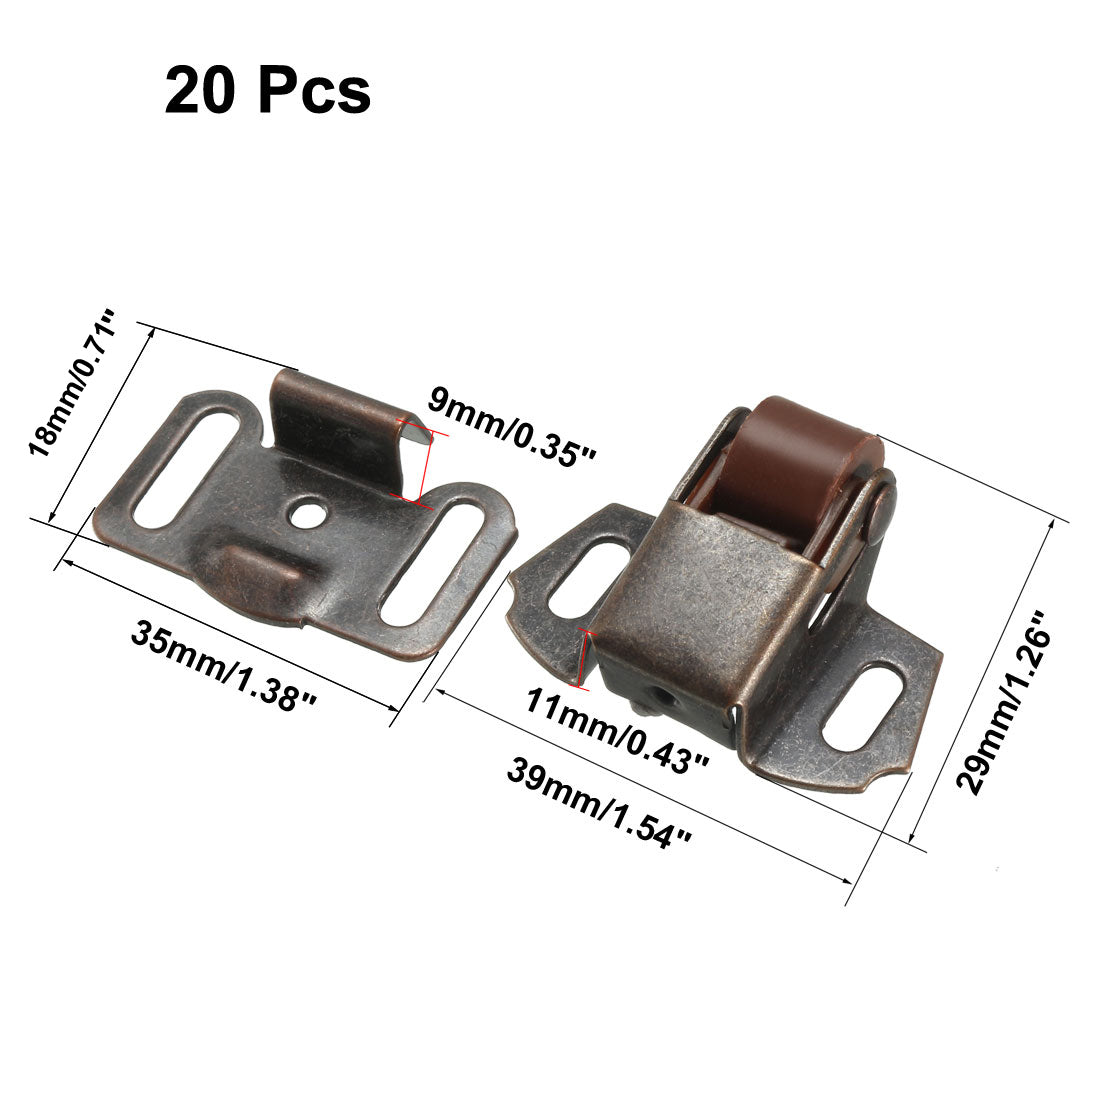 uxcell Uxcell Retro Cabinet Wardrobe Door Single Roller Catch Ball Latch Hardware Copper Tone 20pcs